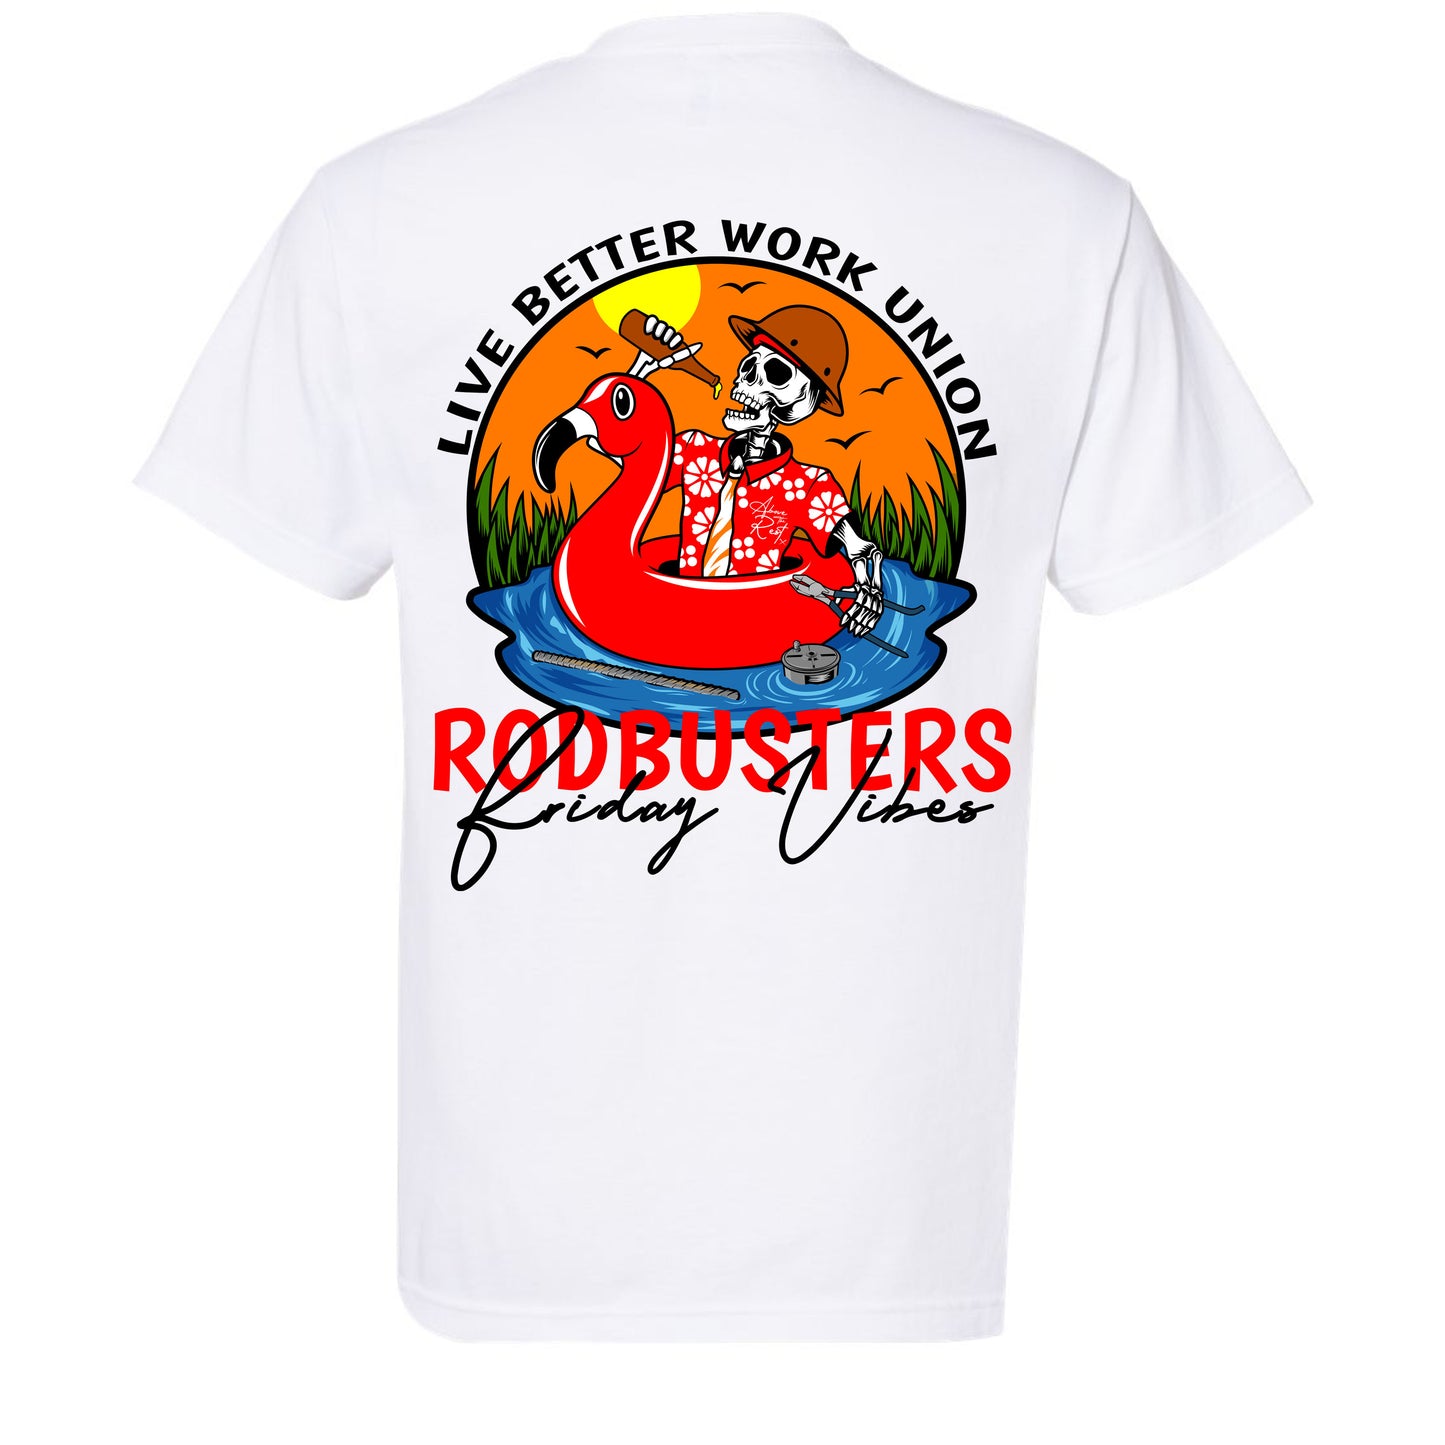 FRIDAY VIBES RODBUSTERS T-SHIRT